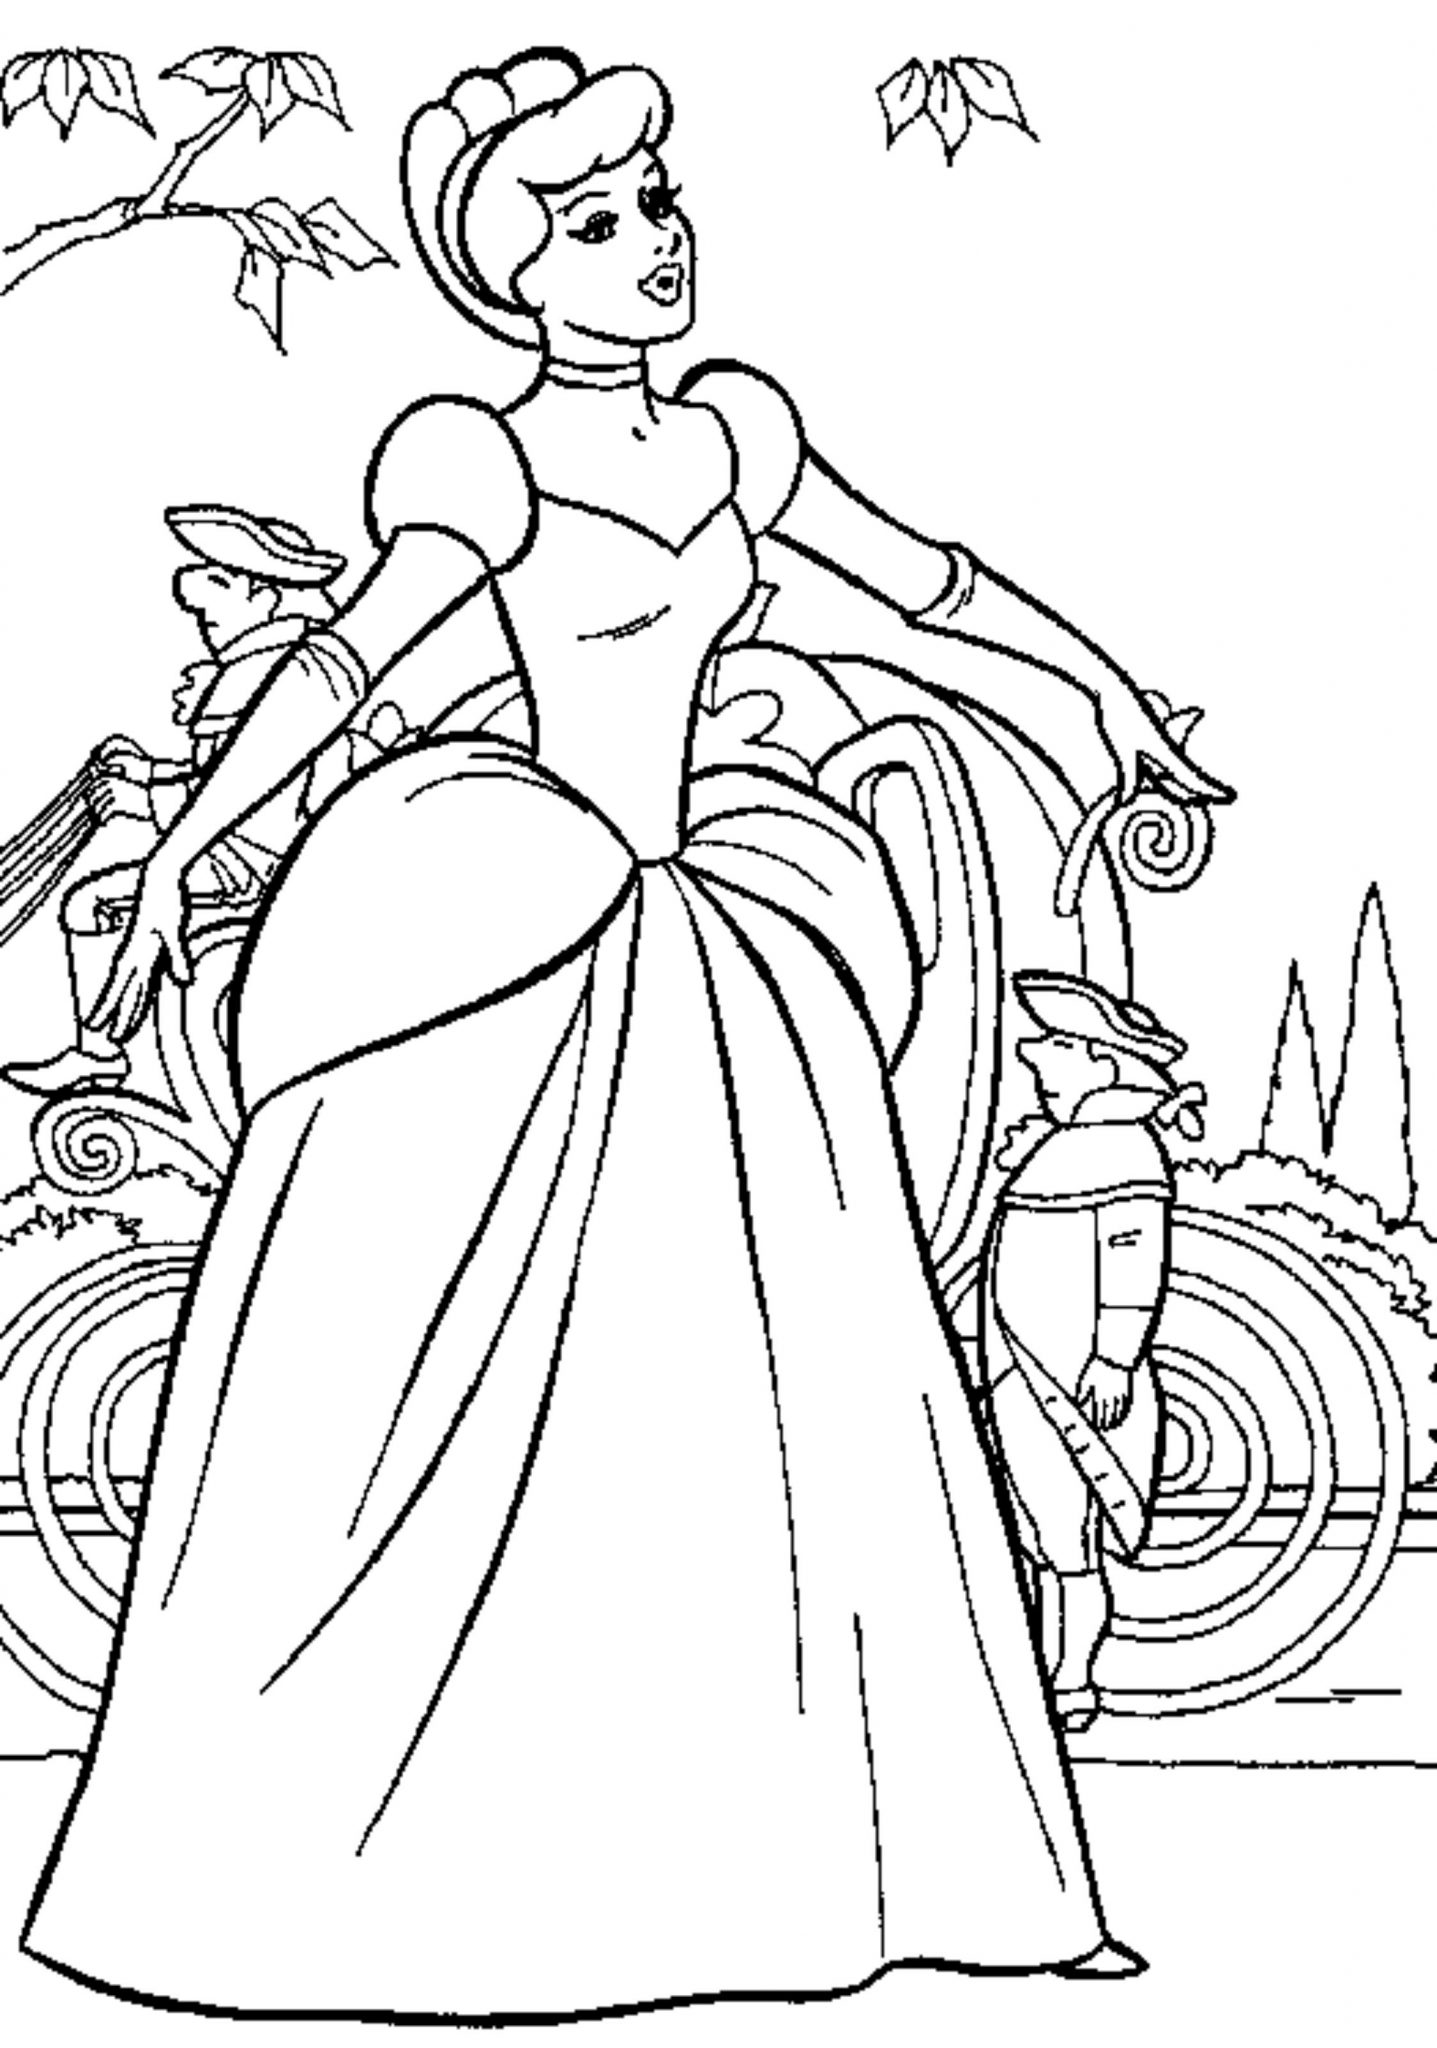 Print & Download - Princess Coloring Pages, Support The Child’s Activity